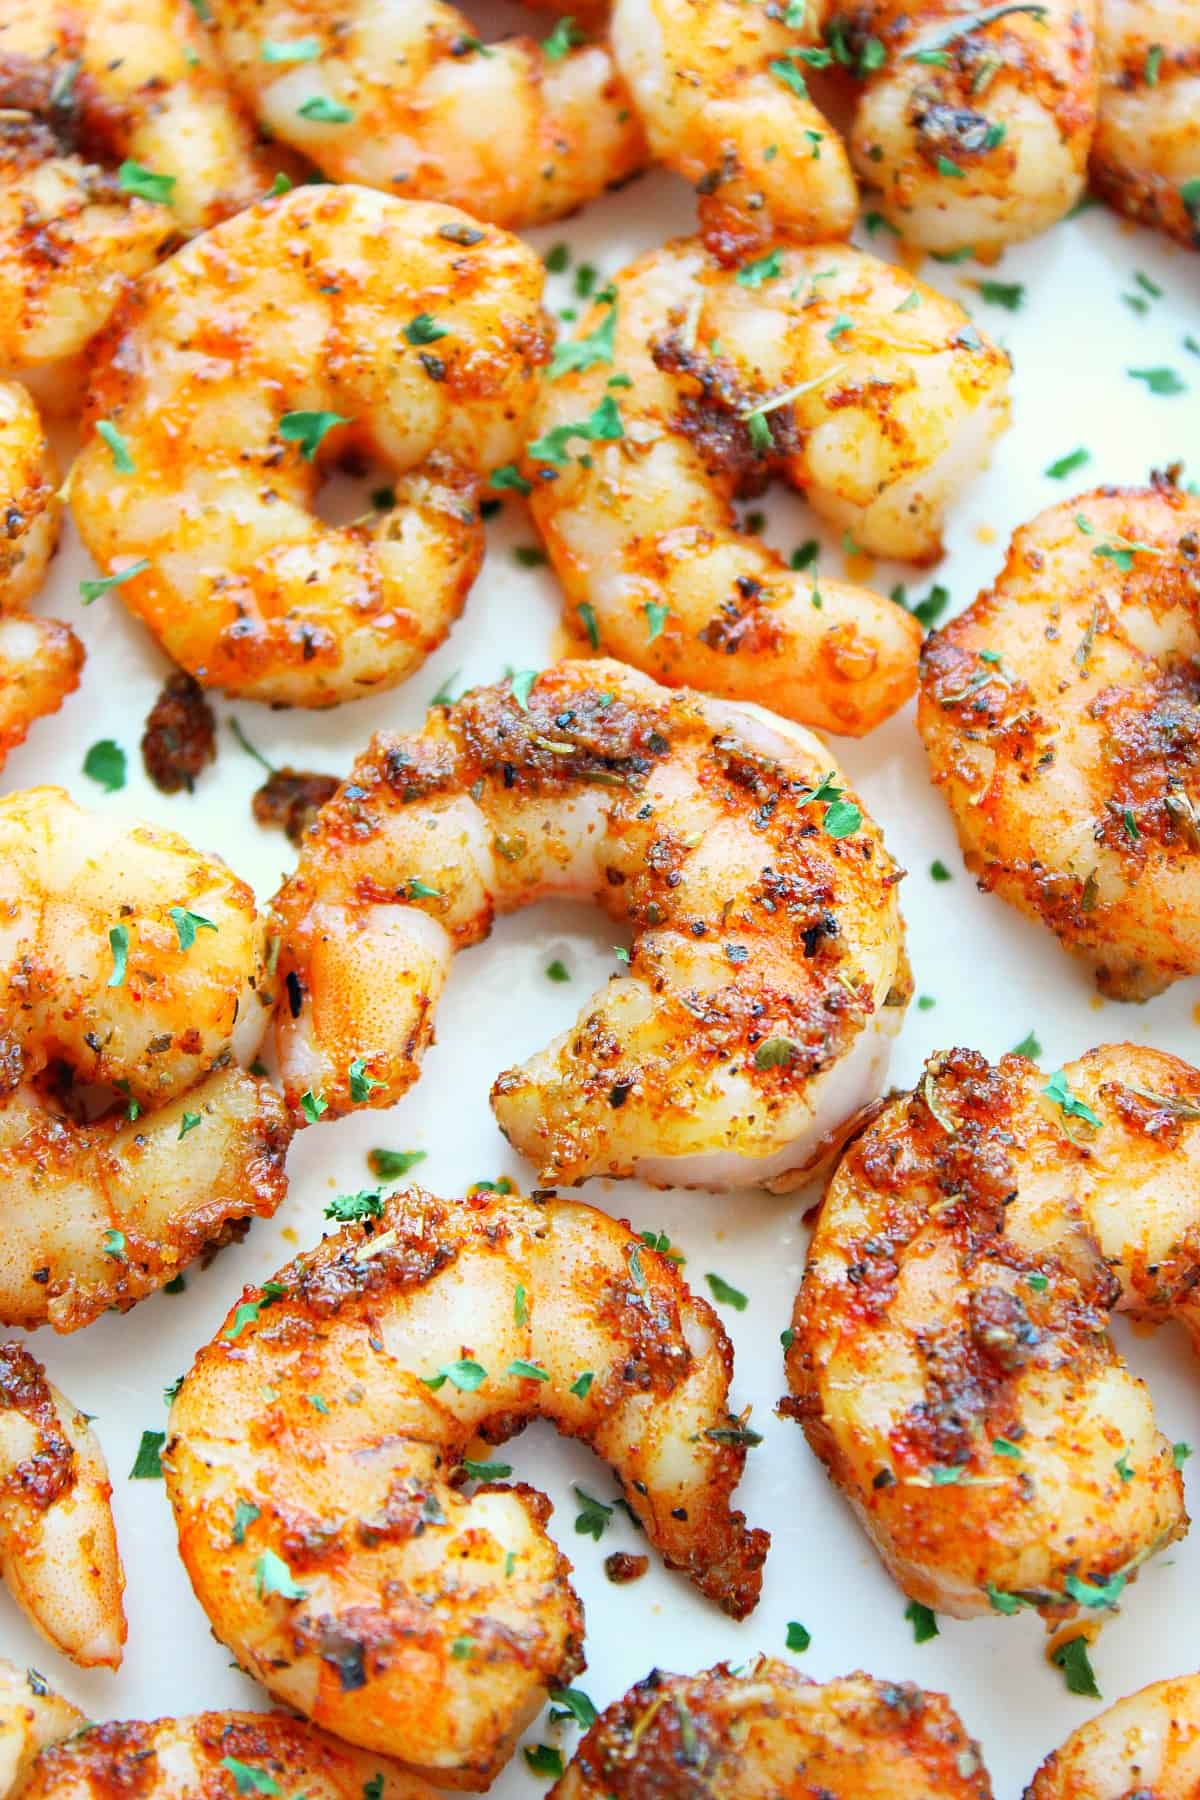 Cooked shrimp on white plate.